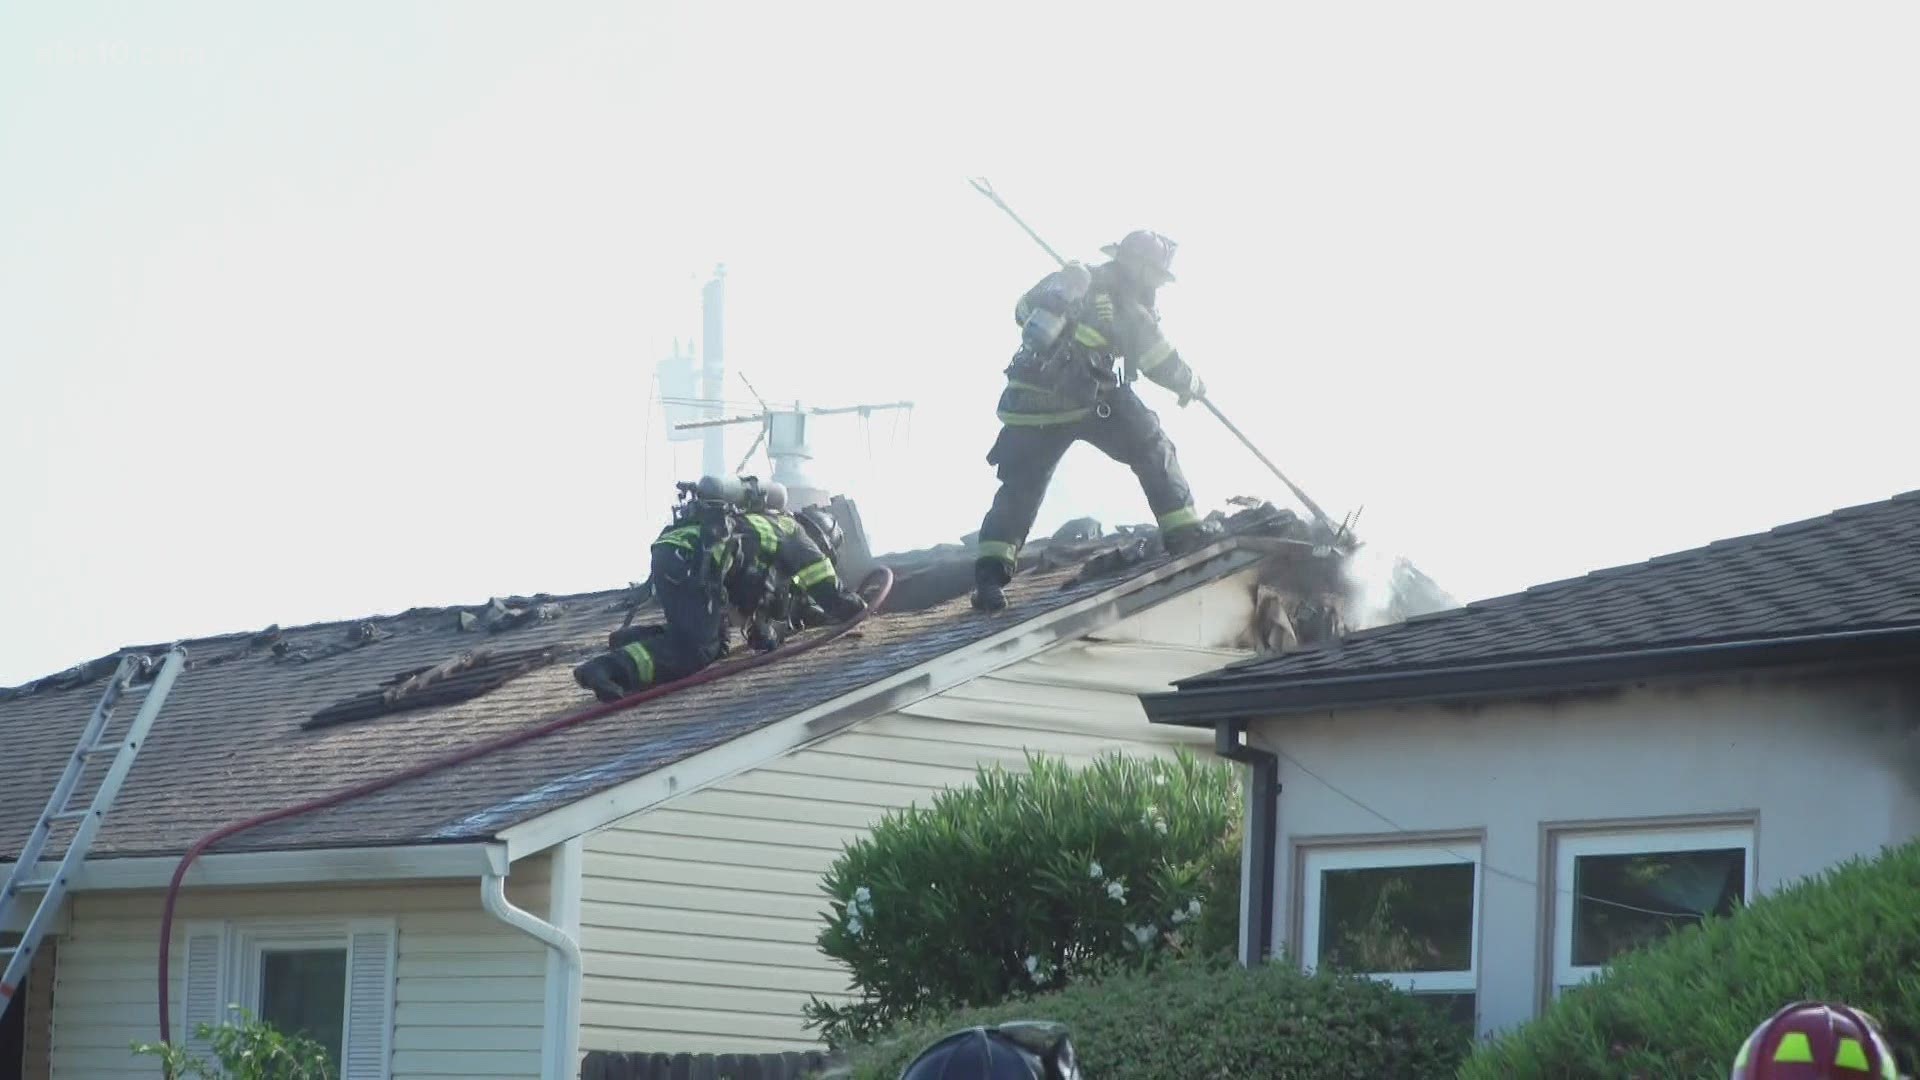 Firefighters were called out to the scene of the two-alarm blaze in the 5600 block of 11th Avenue just before 5 p.m.